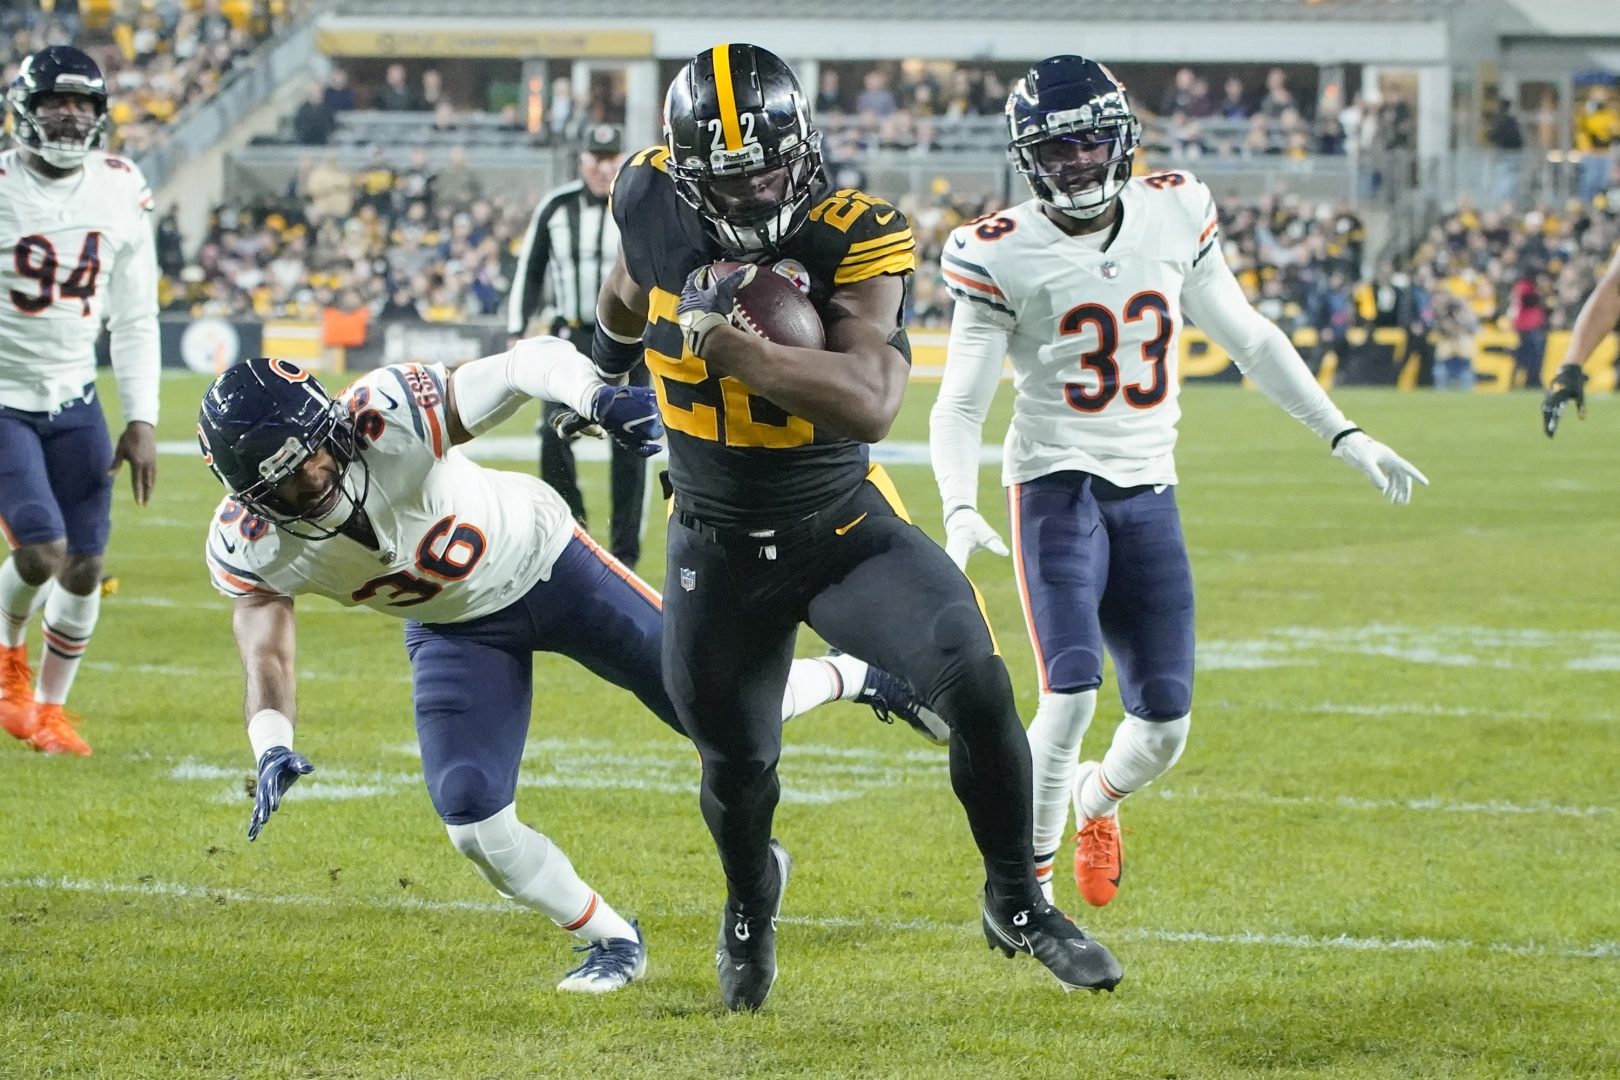 Pittsburgh Steelers running back Najee Harris (22) scores a touchdown past Chicago Bears defensive back DeAndre Houston-Carson (36) and cornerback Jaylon Johnson (33) in the first half of an NFL football game, Monday, Nov. 8, 2021, in Pittsburgh.